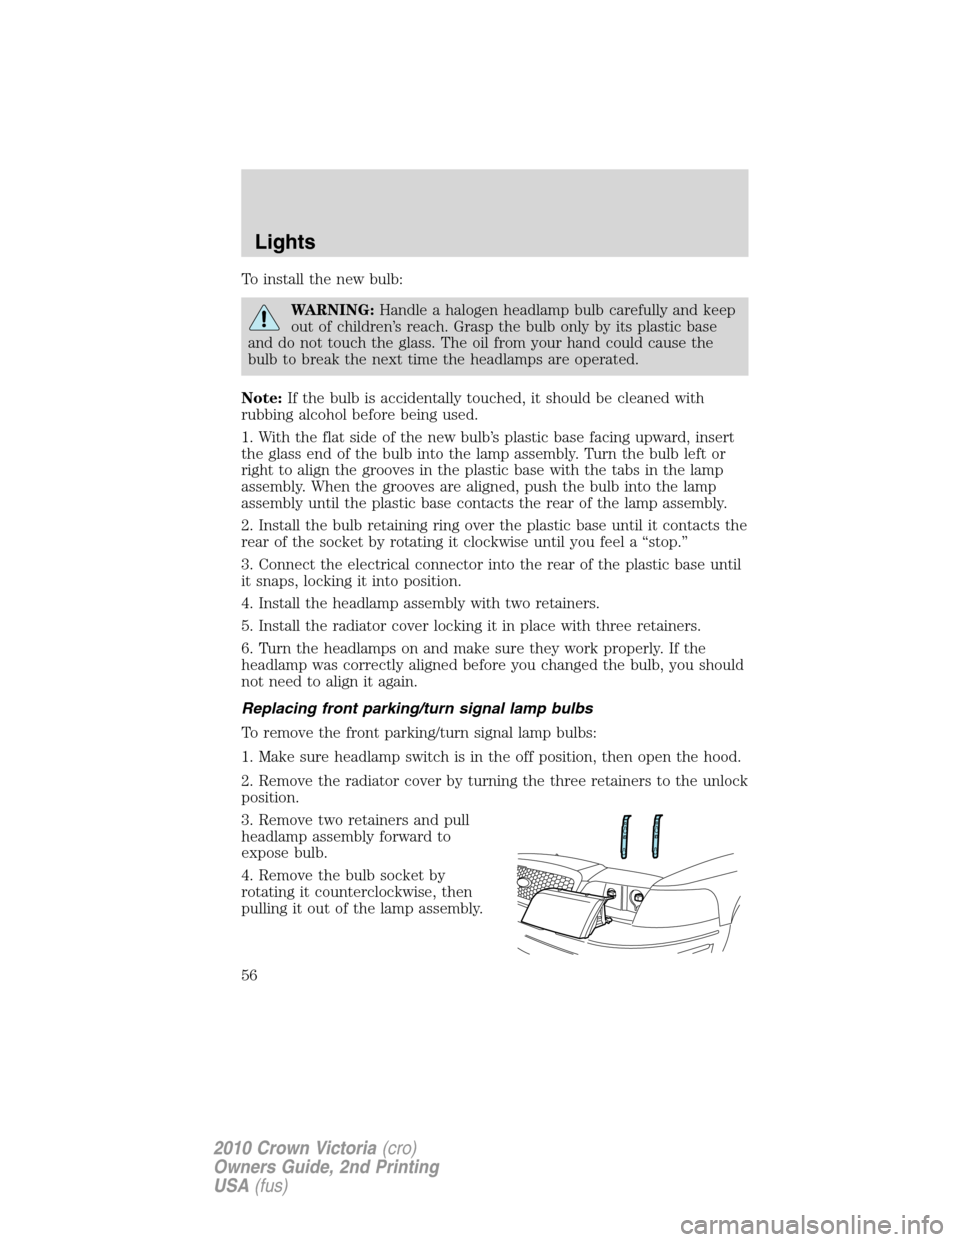 Mercury Grand Marquis 2010  s Workshop Manual To install the new bulb:
WARNING:Handle a halogen headlamp bulb carefully and keep
out of children’s reach. Grasp the bulb only by its plastic base
and do not touch the glass. The oil from your hand